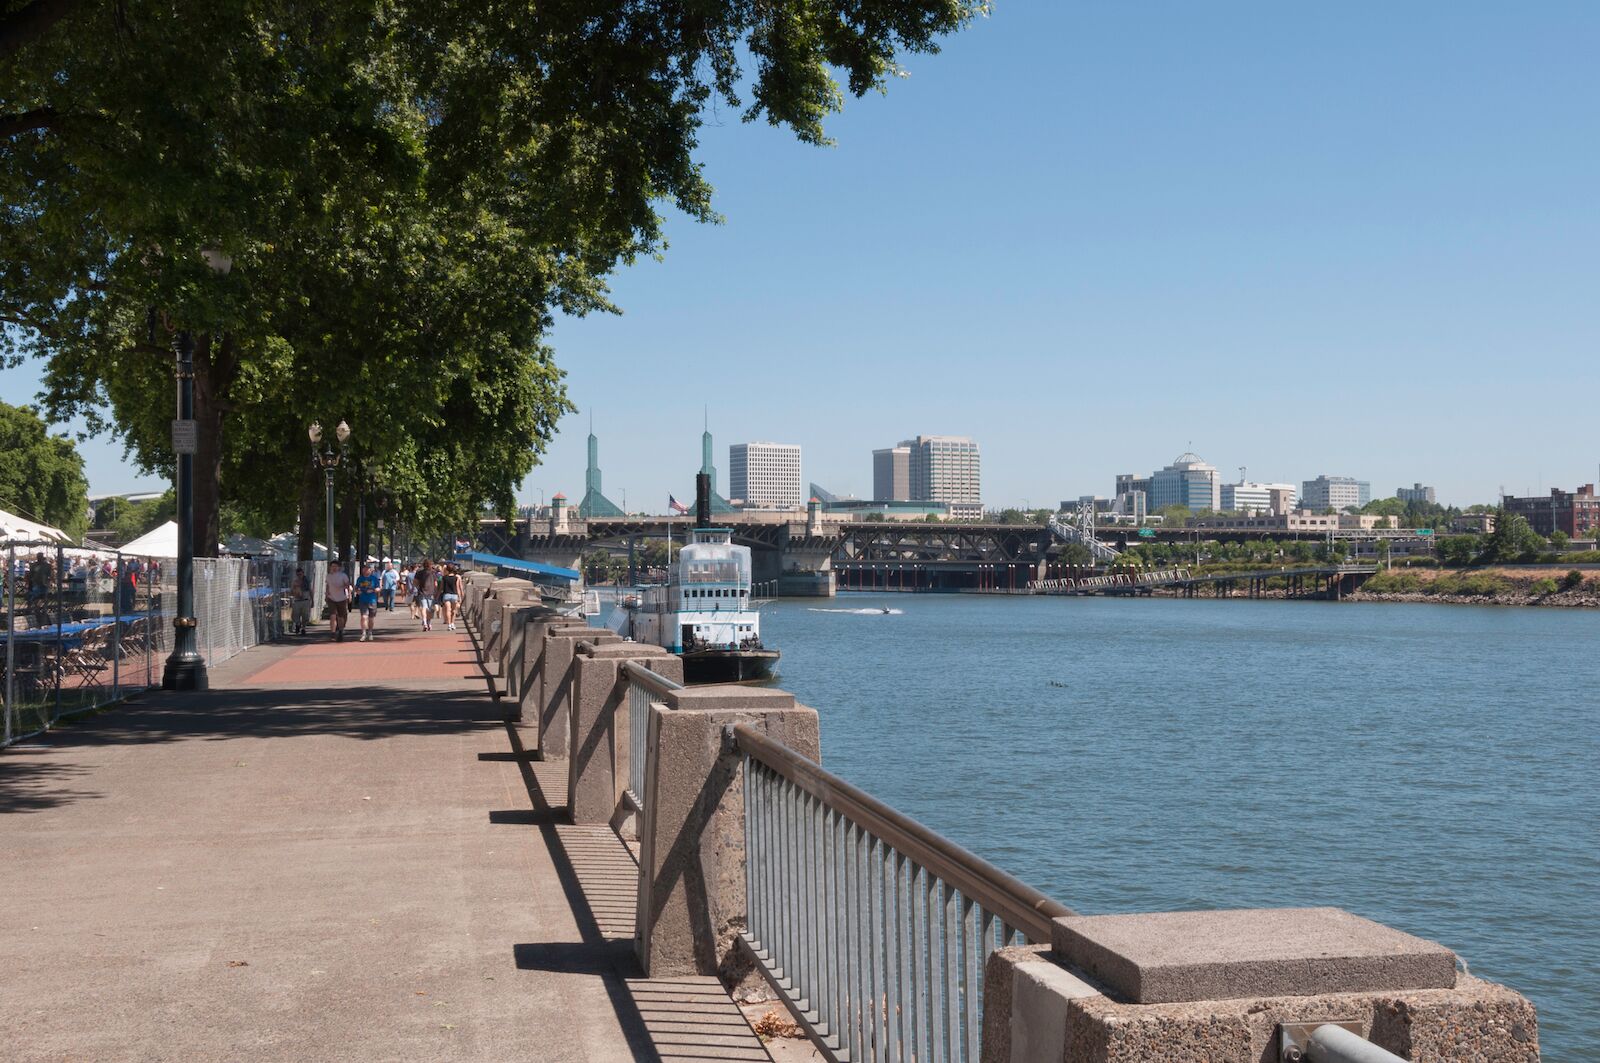 Portland, Oregon - July 24. 2010: Walkway along the Willamette River in Waterfront Park with the Portland Saturday Market stalls set up on the left side behind the fencing